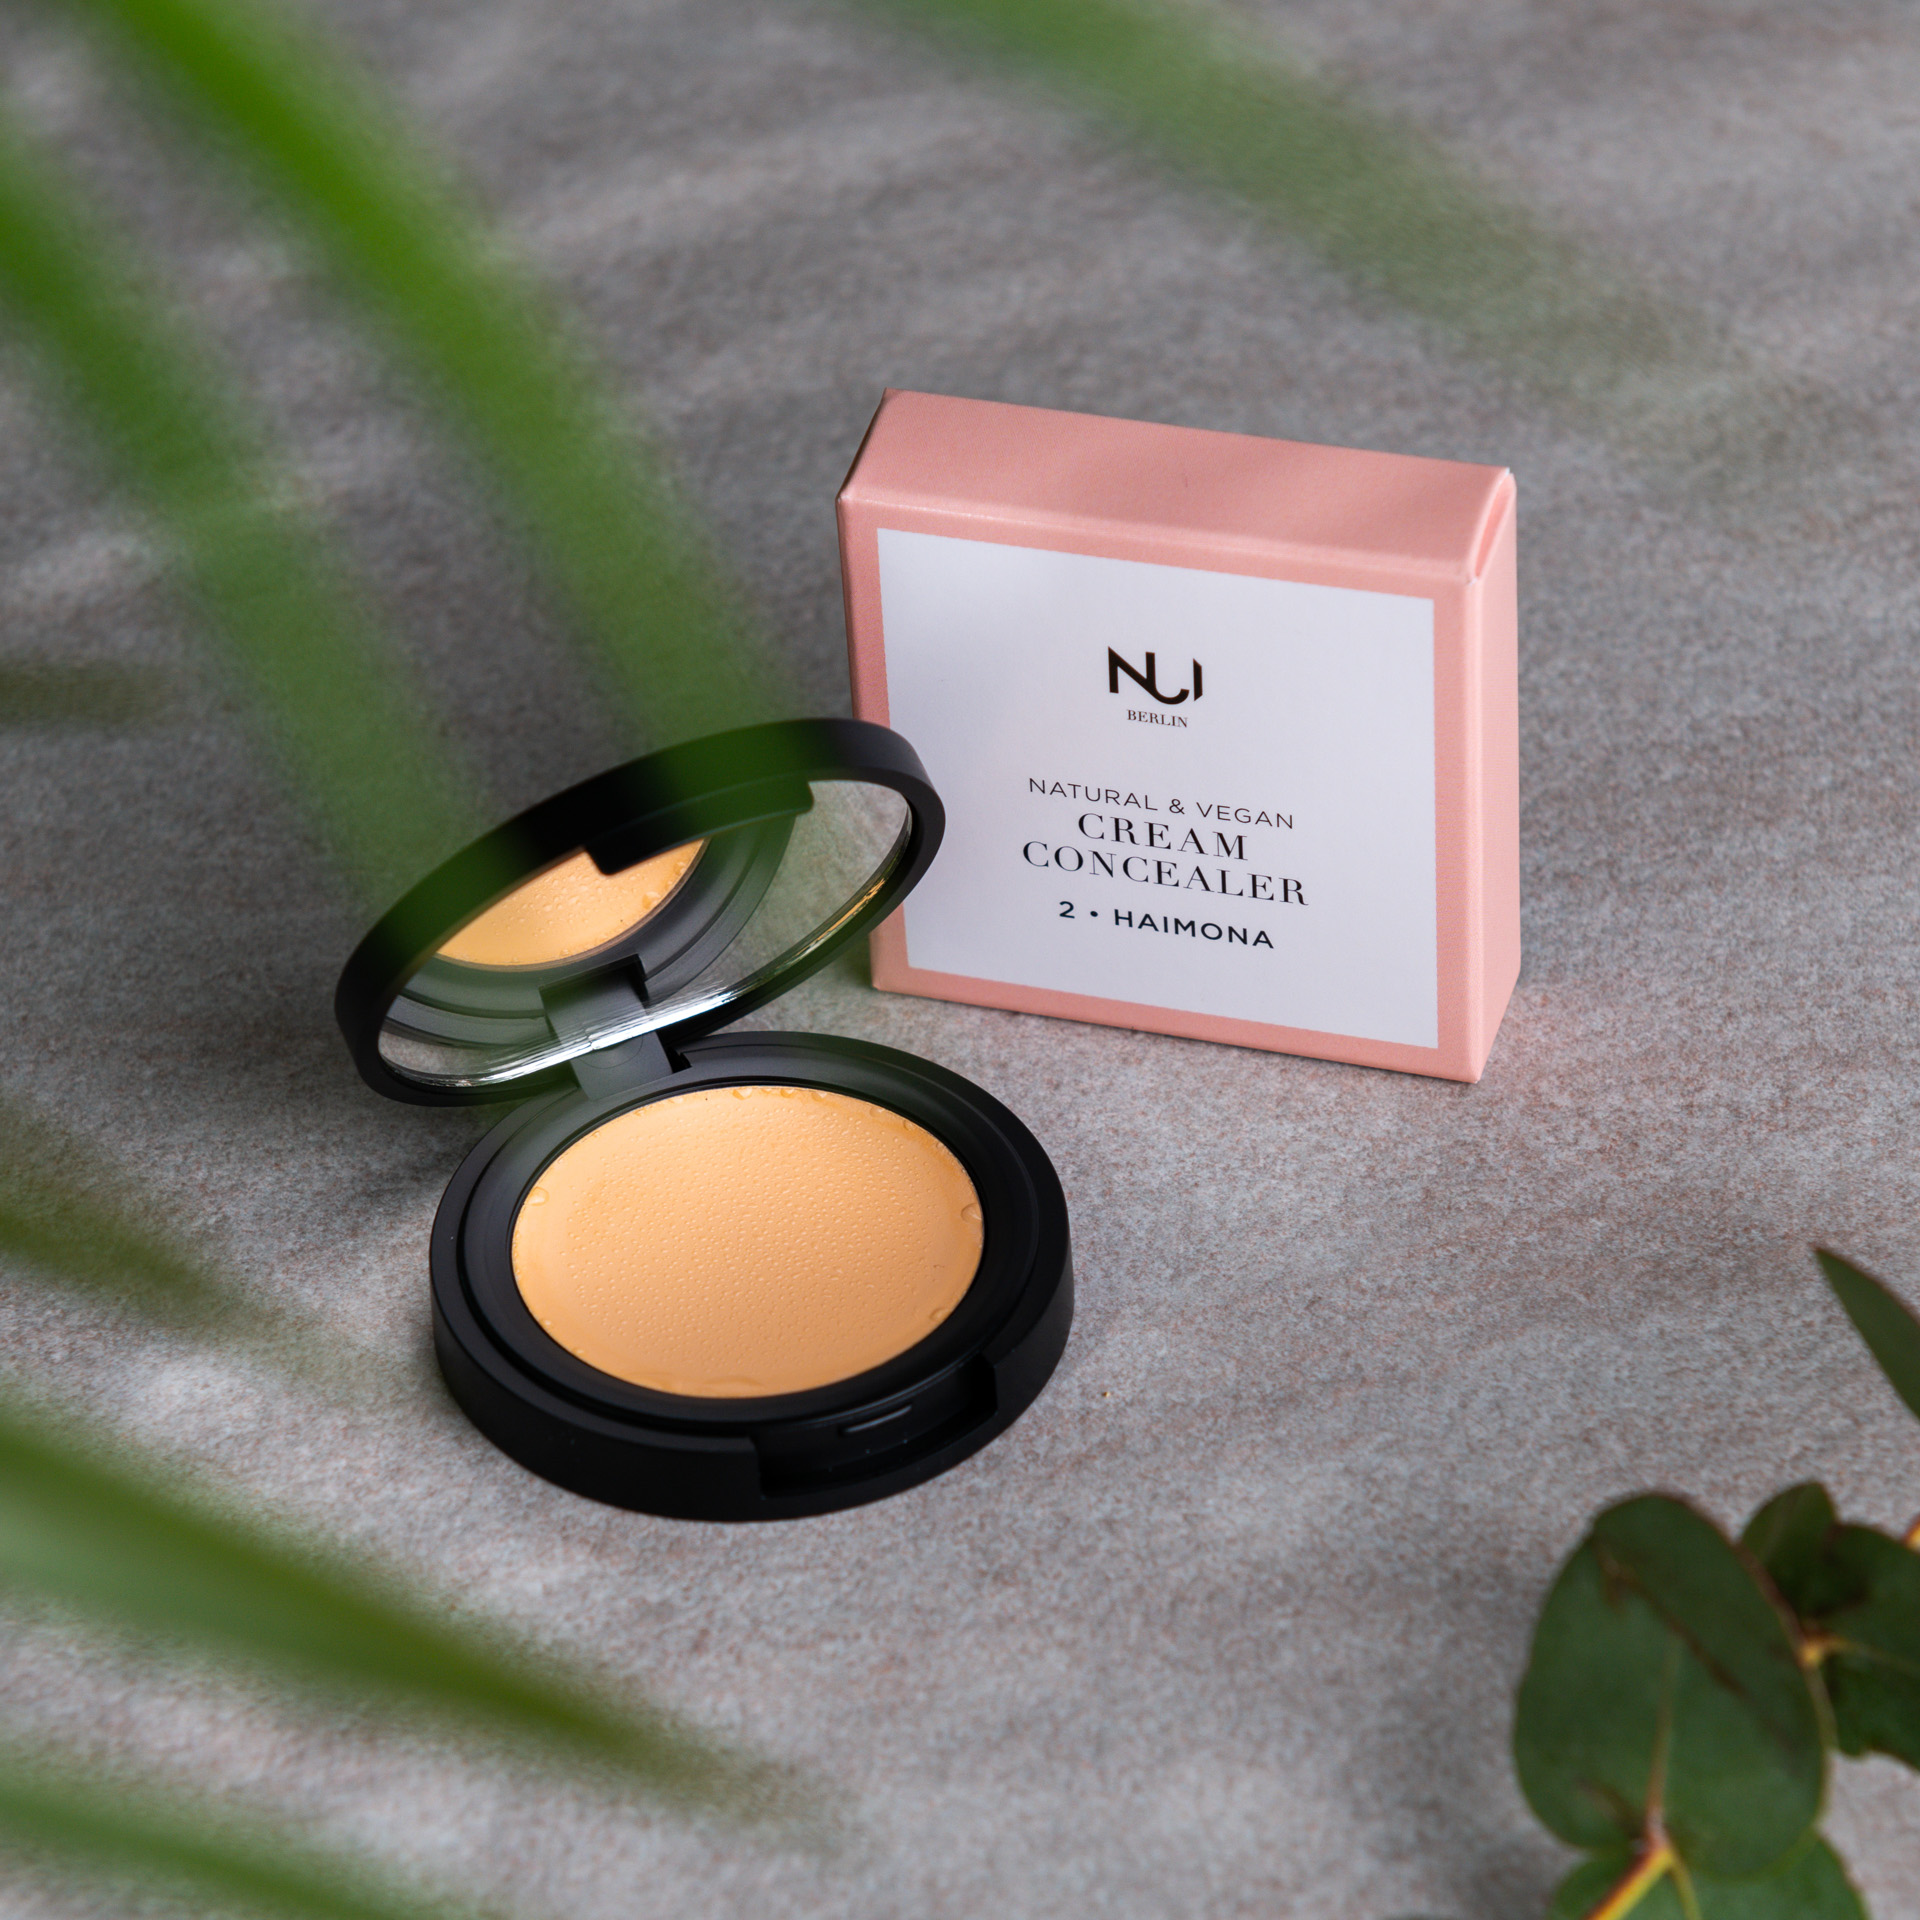 NUI Natural Concealer 02 HAIMONA